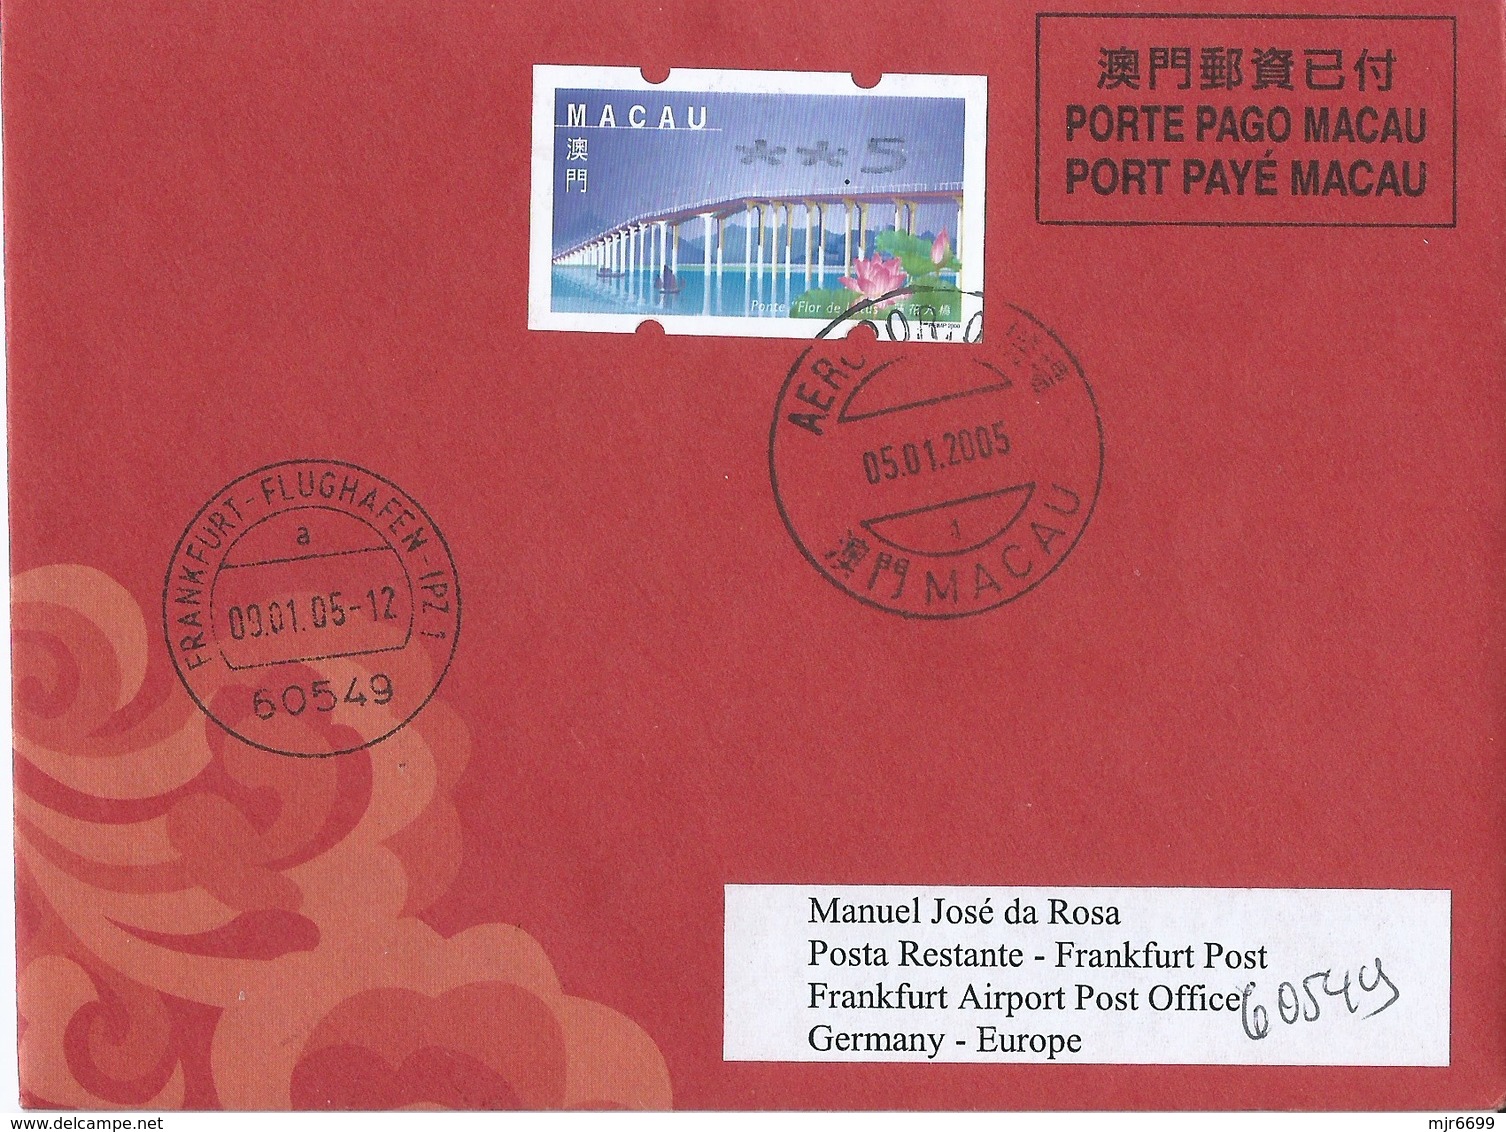 MACAU 2005 LUNAR NEW YEAR OF THE COCK GREETING CARD & POSTAGE PAID COVER 1ST DAY USAGE TO GERMANY - Interi Postali